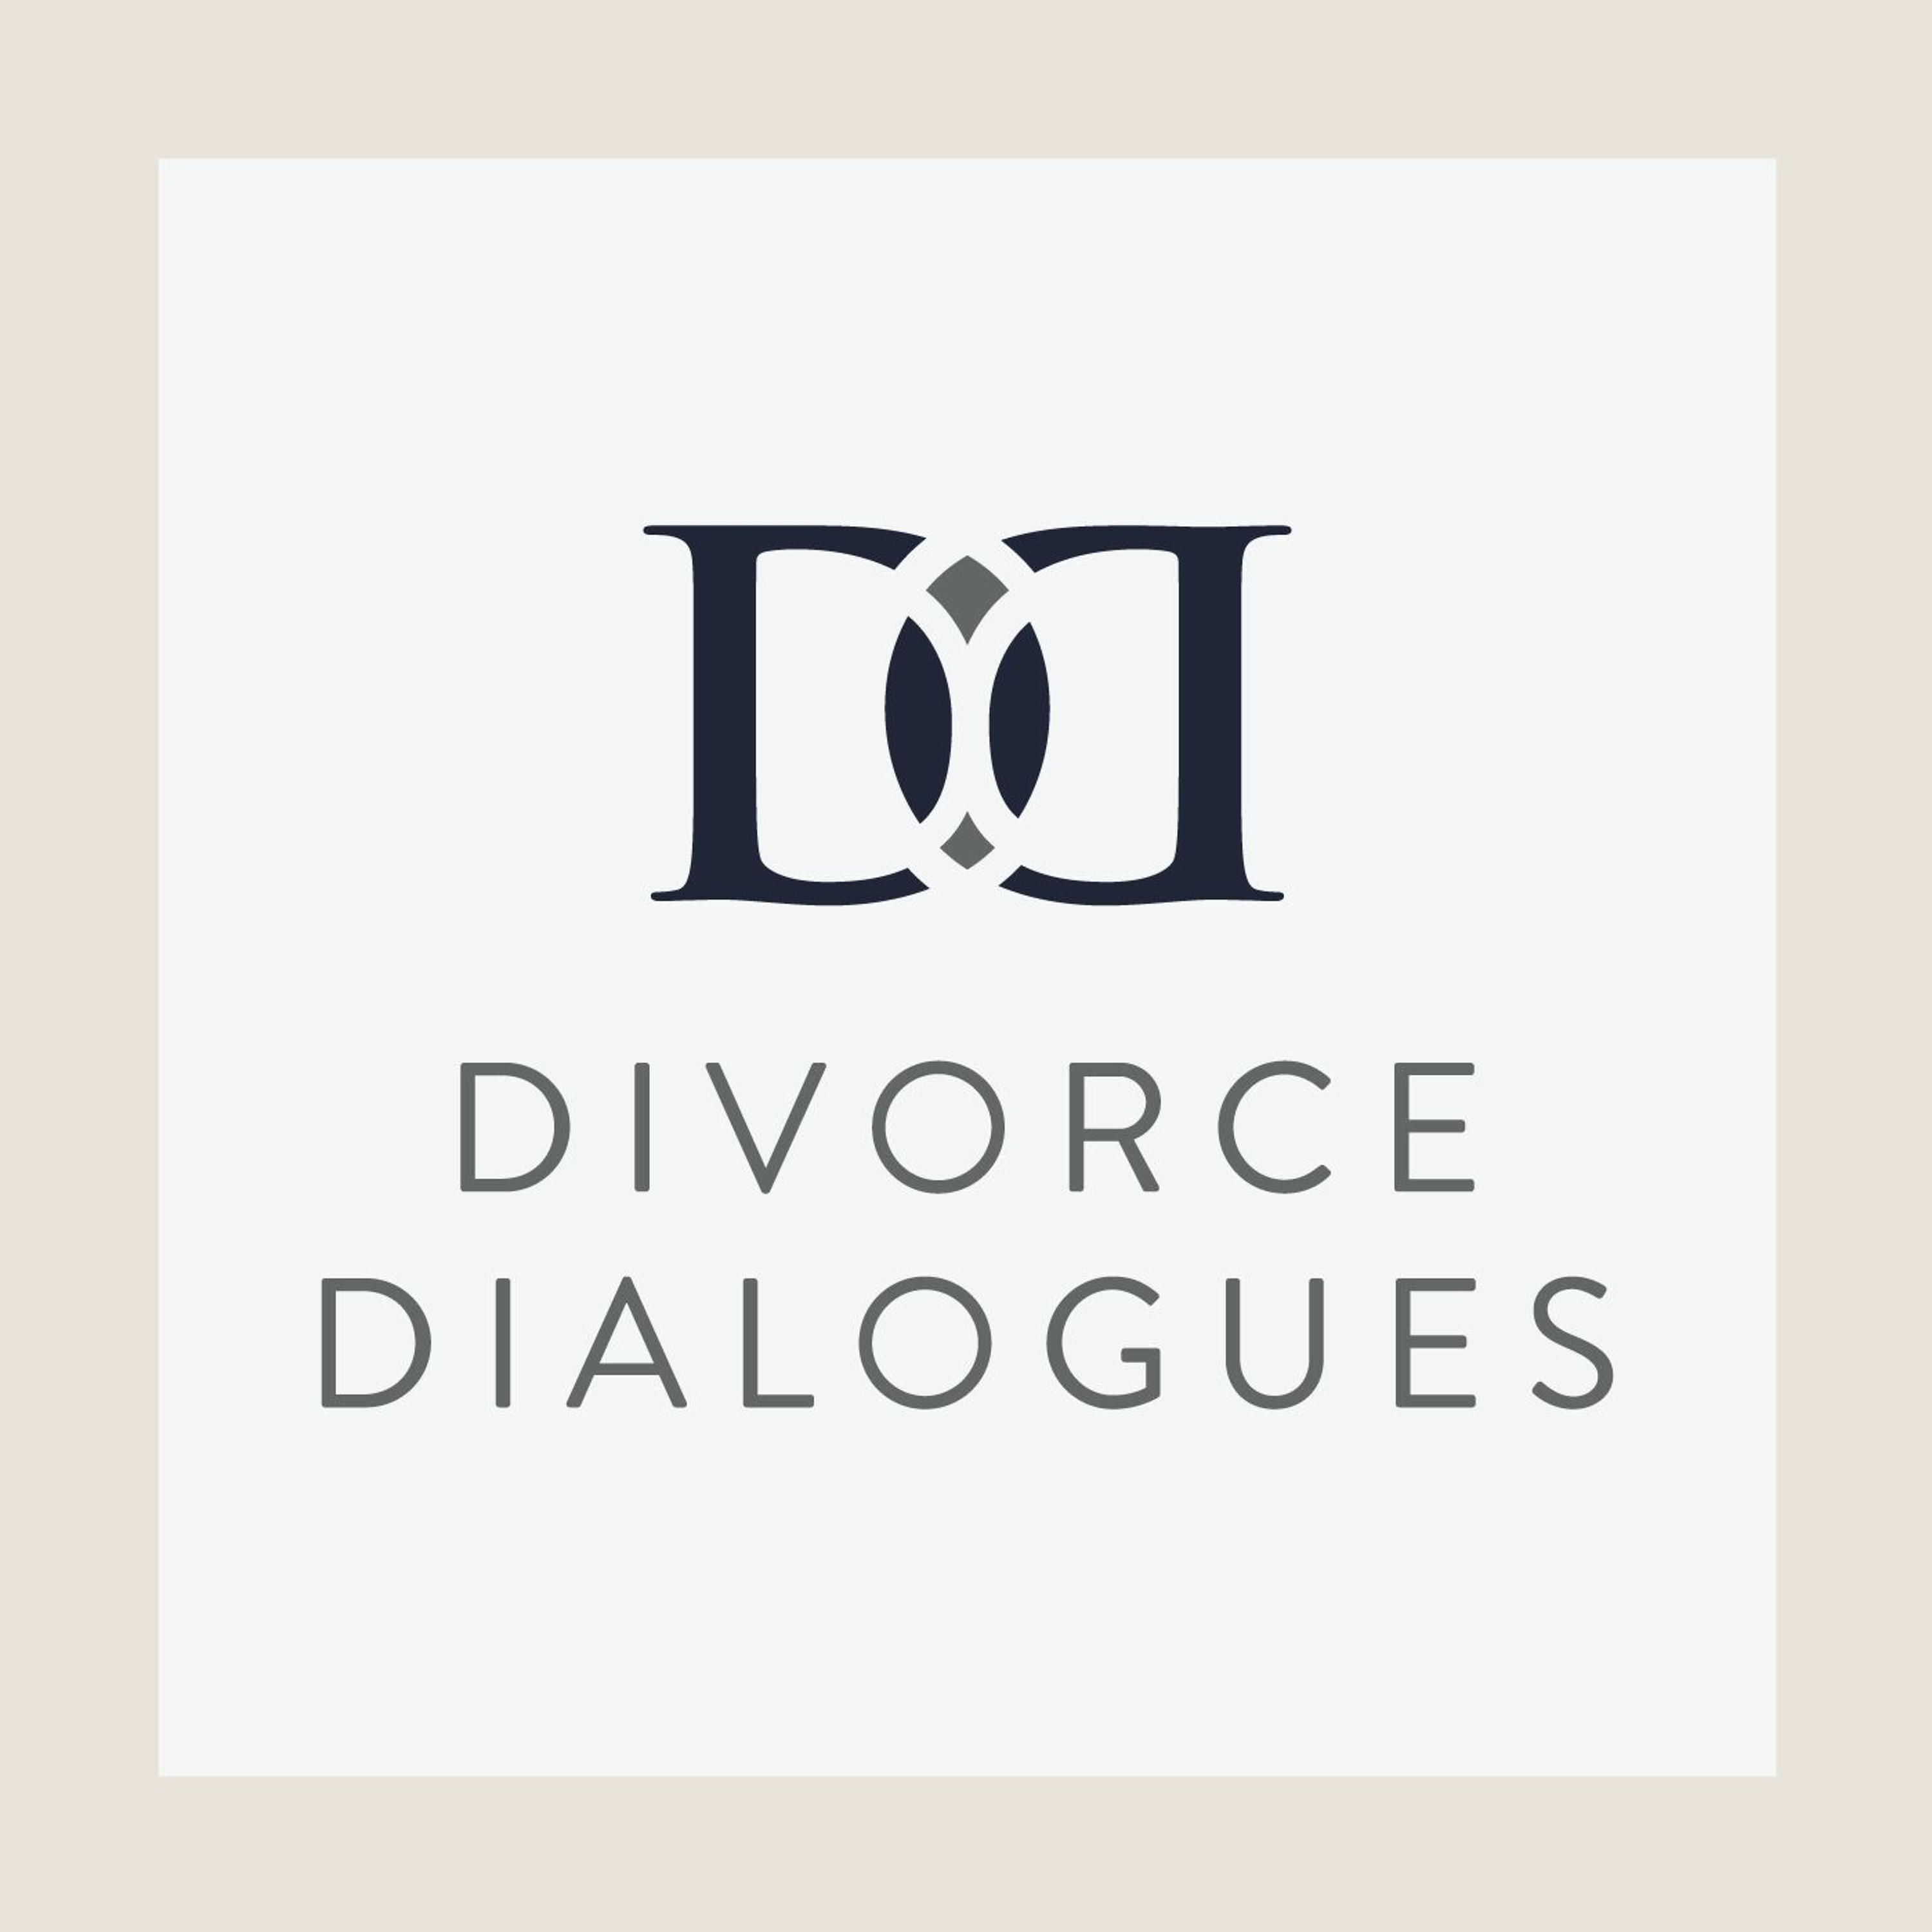 Divorce Dialogues - The Relationship Between Surrogates And Intended Parents With Alex Cirel